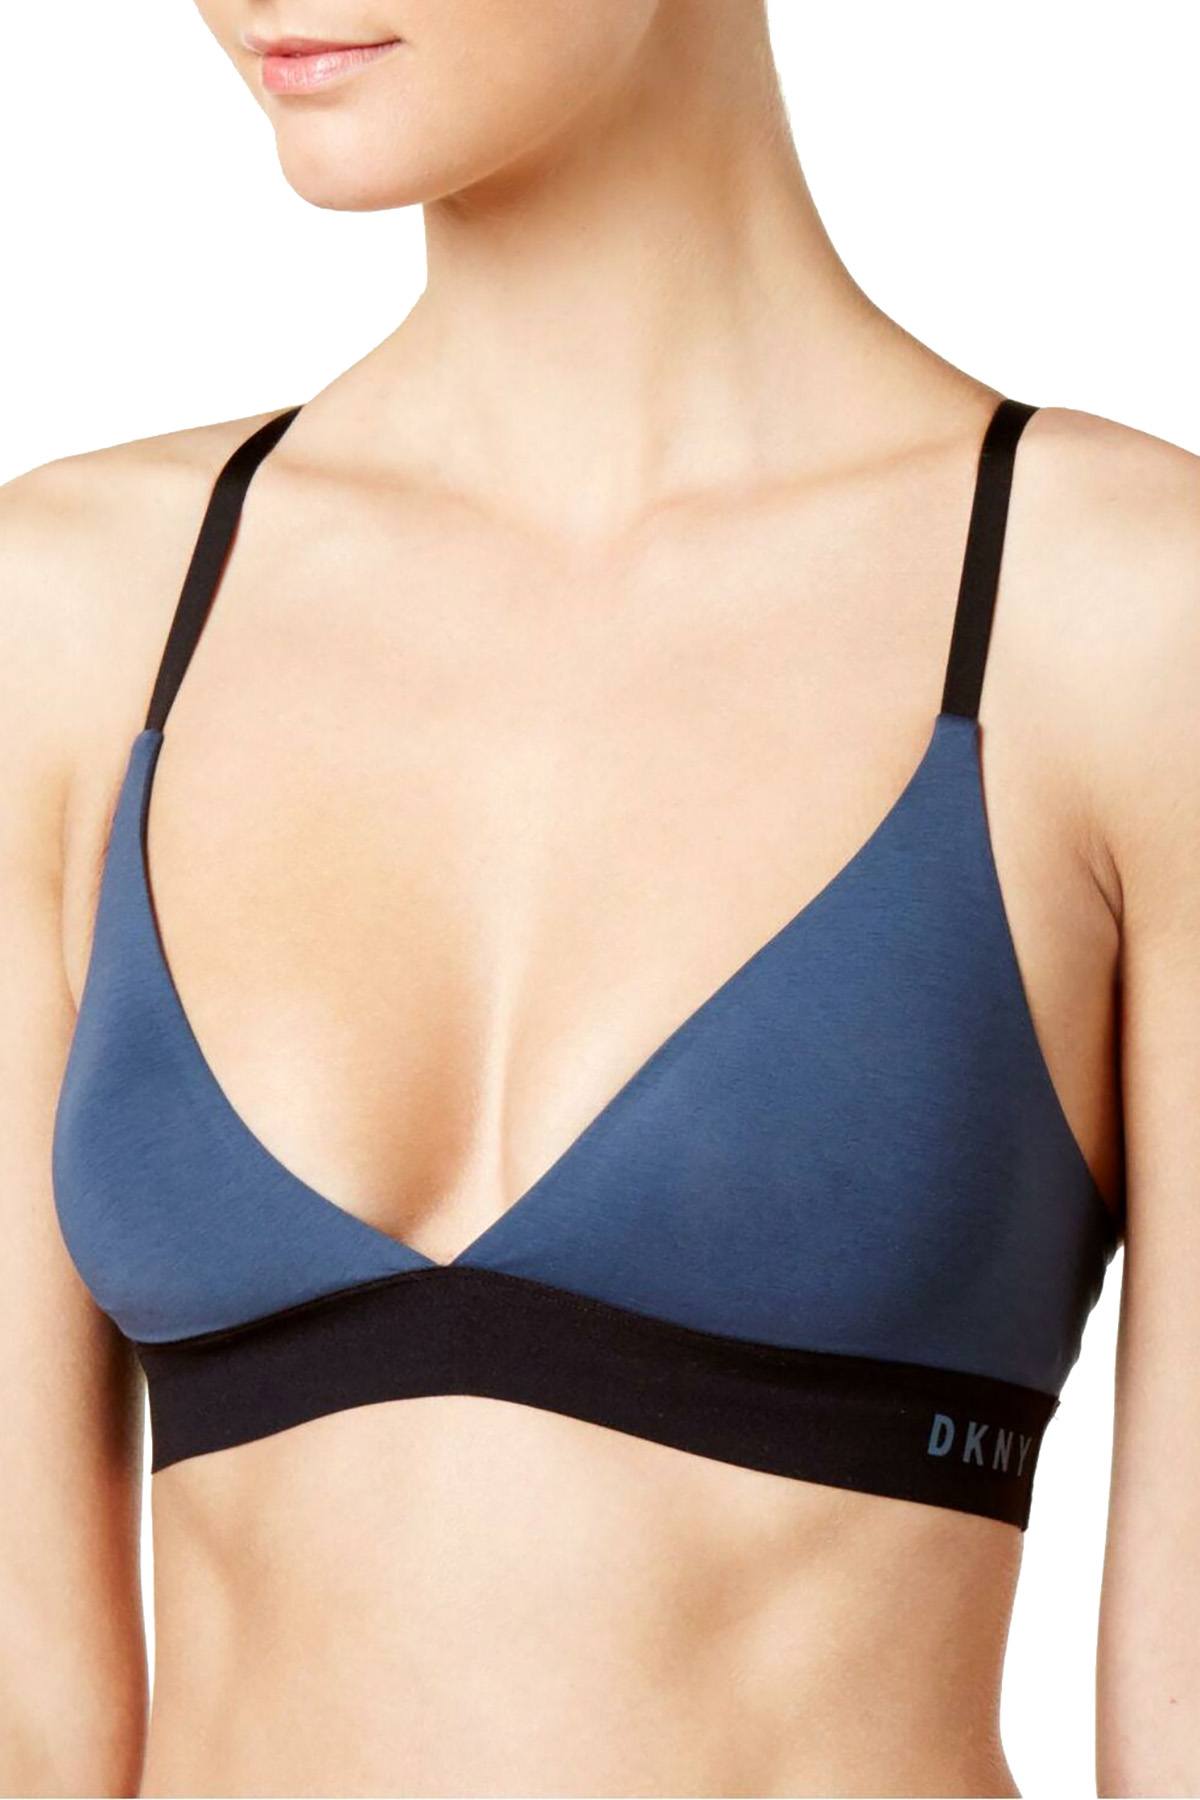 DKNY Steel Blue and Black Convertible Classic Cotton Bralette